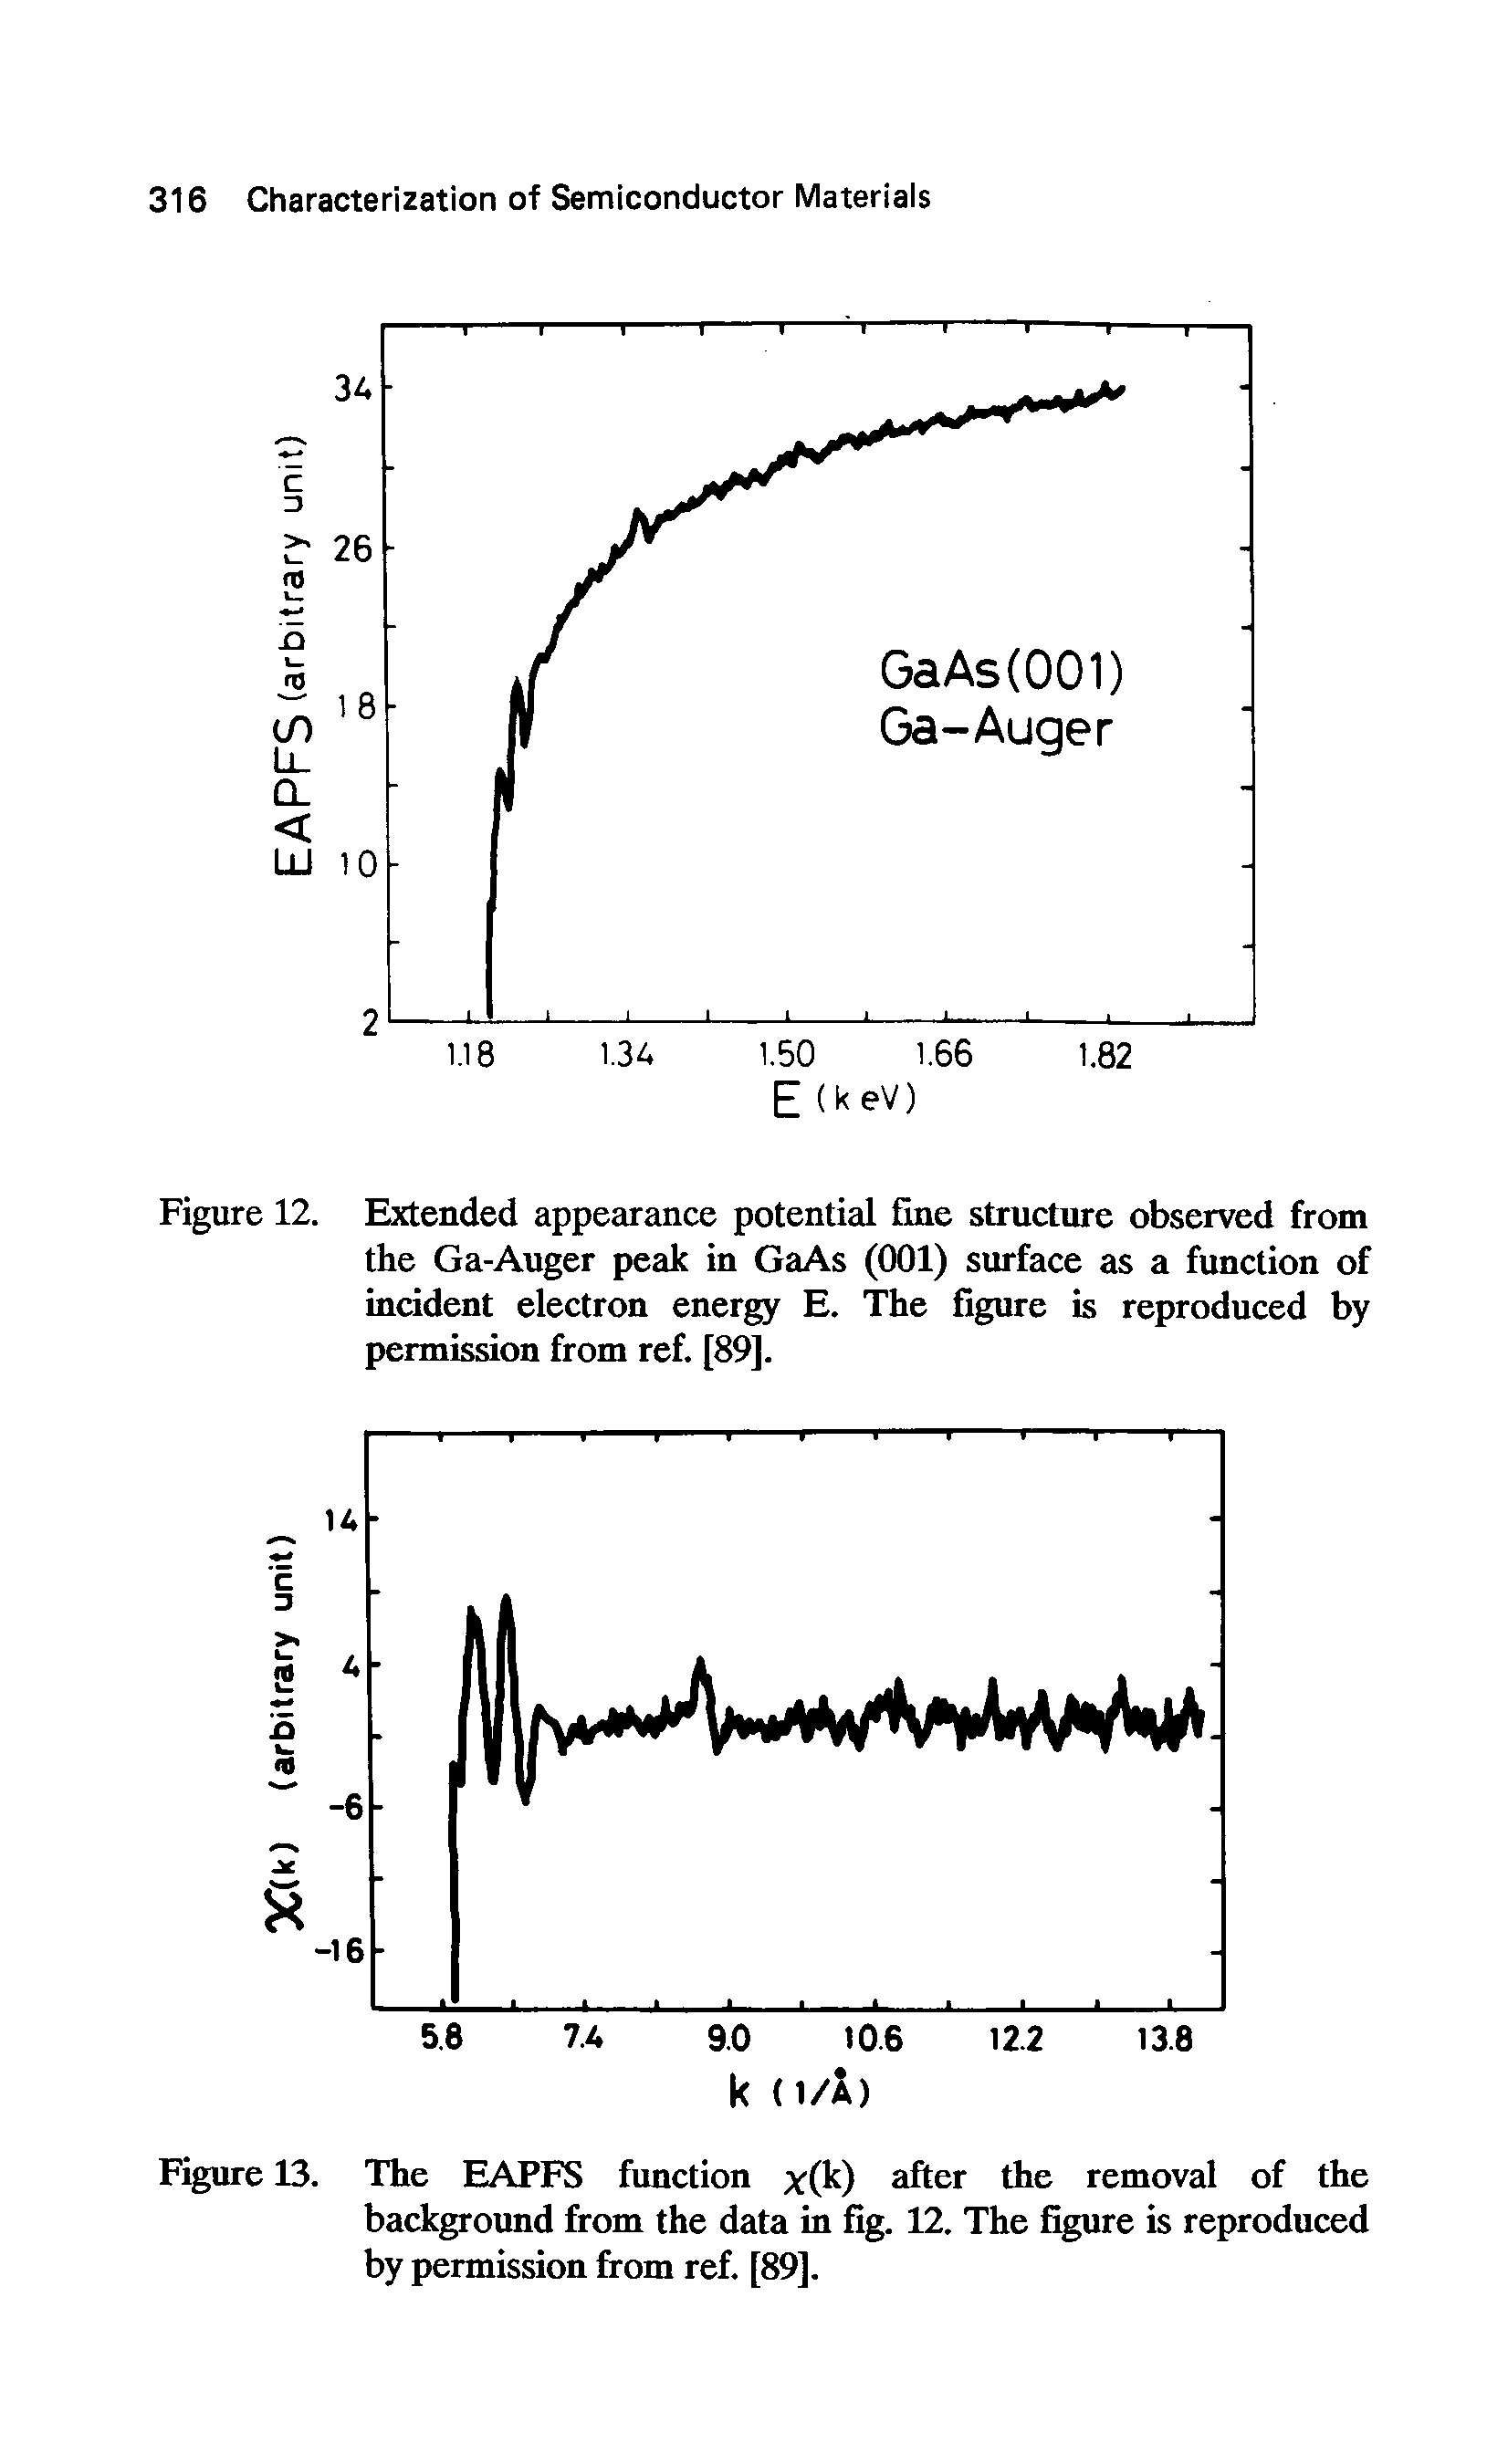 Figure 12. Extended appearance potential fine structure observed from the Ga-Auger peak in GaAs (001) surface as a function of inddent electron ener E. The figure is reproduced by permission from ref. [89].